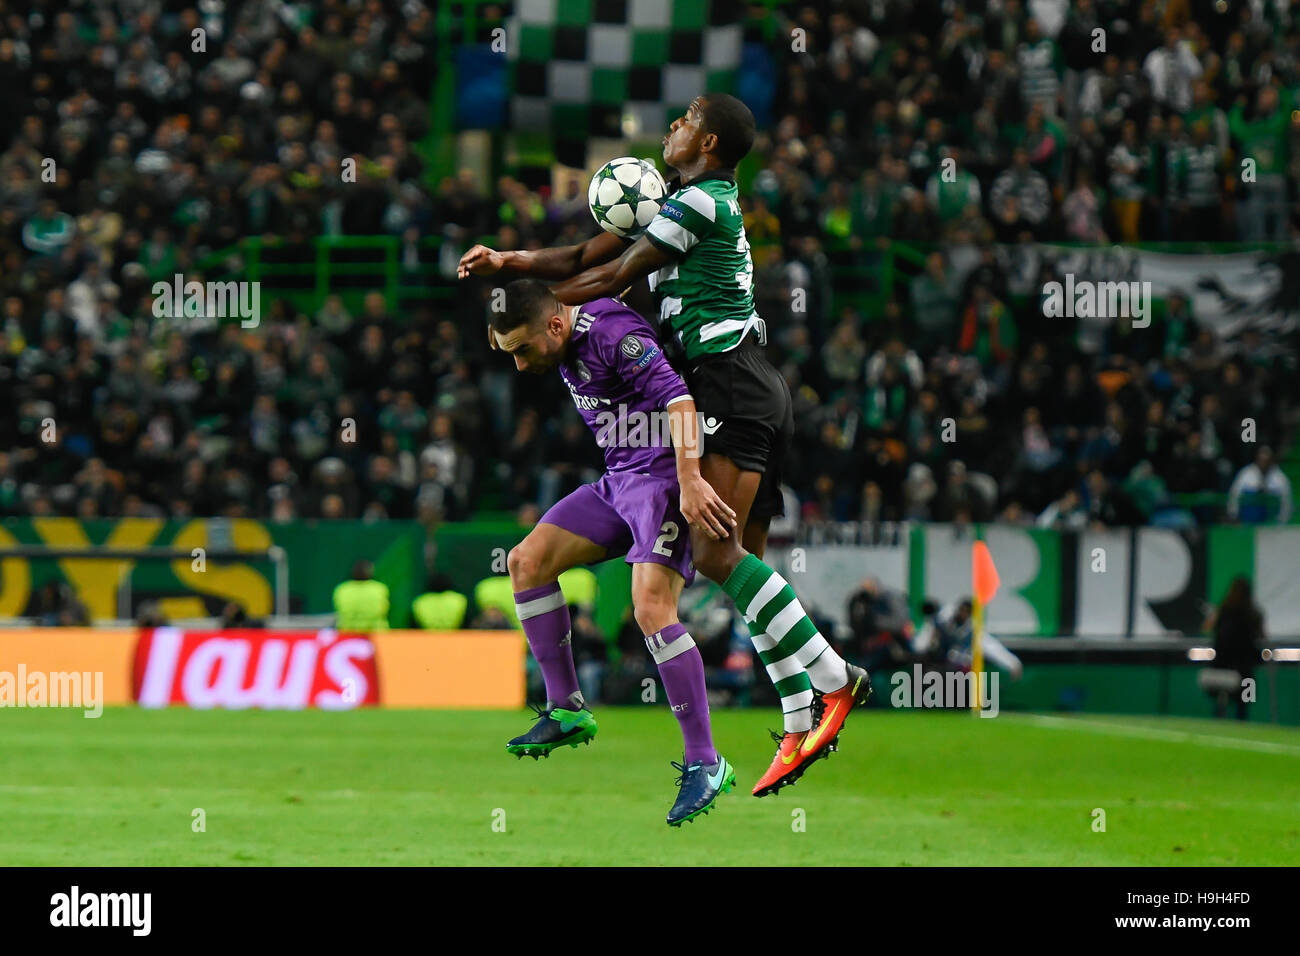 Lisbon, Portugal. 22nd November, 2016. SPORTING-REAL MADRID  - Carvajal (L) and Zeegelaar (R) in action during UEFA Champions League football match between Sporting and Real Madrid, in Lisbon, Portugal. Photo: Bruno de Carvalho/ImagesPic Credit:  imagespic/Alamy Live News Stock Photo